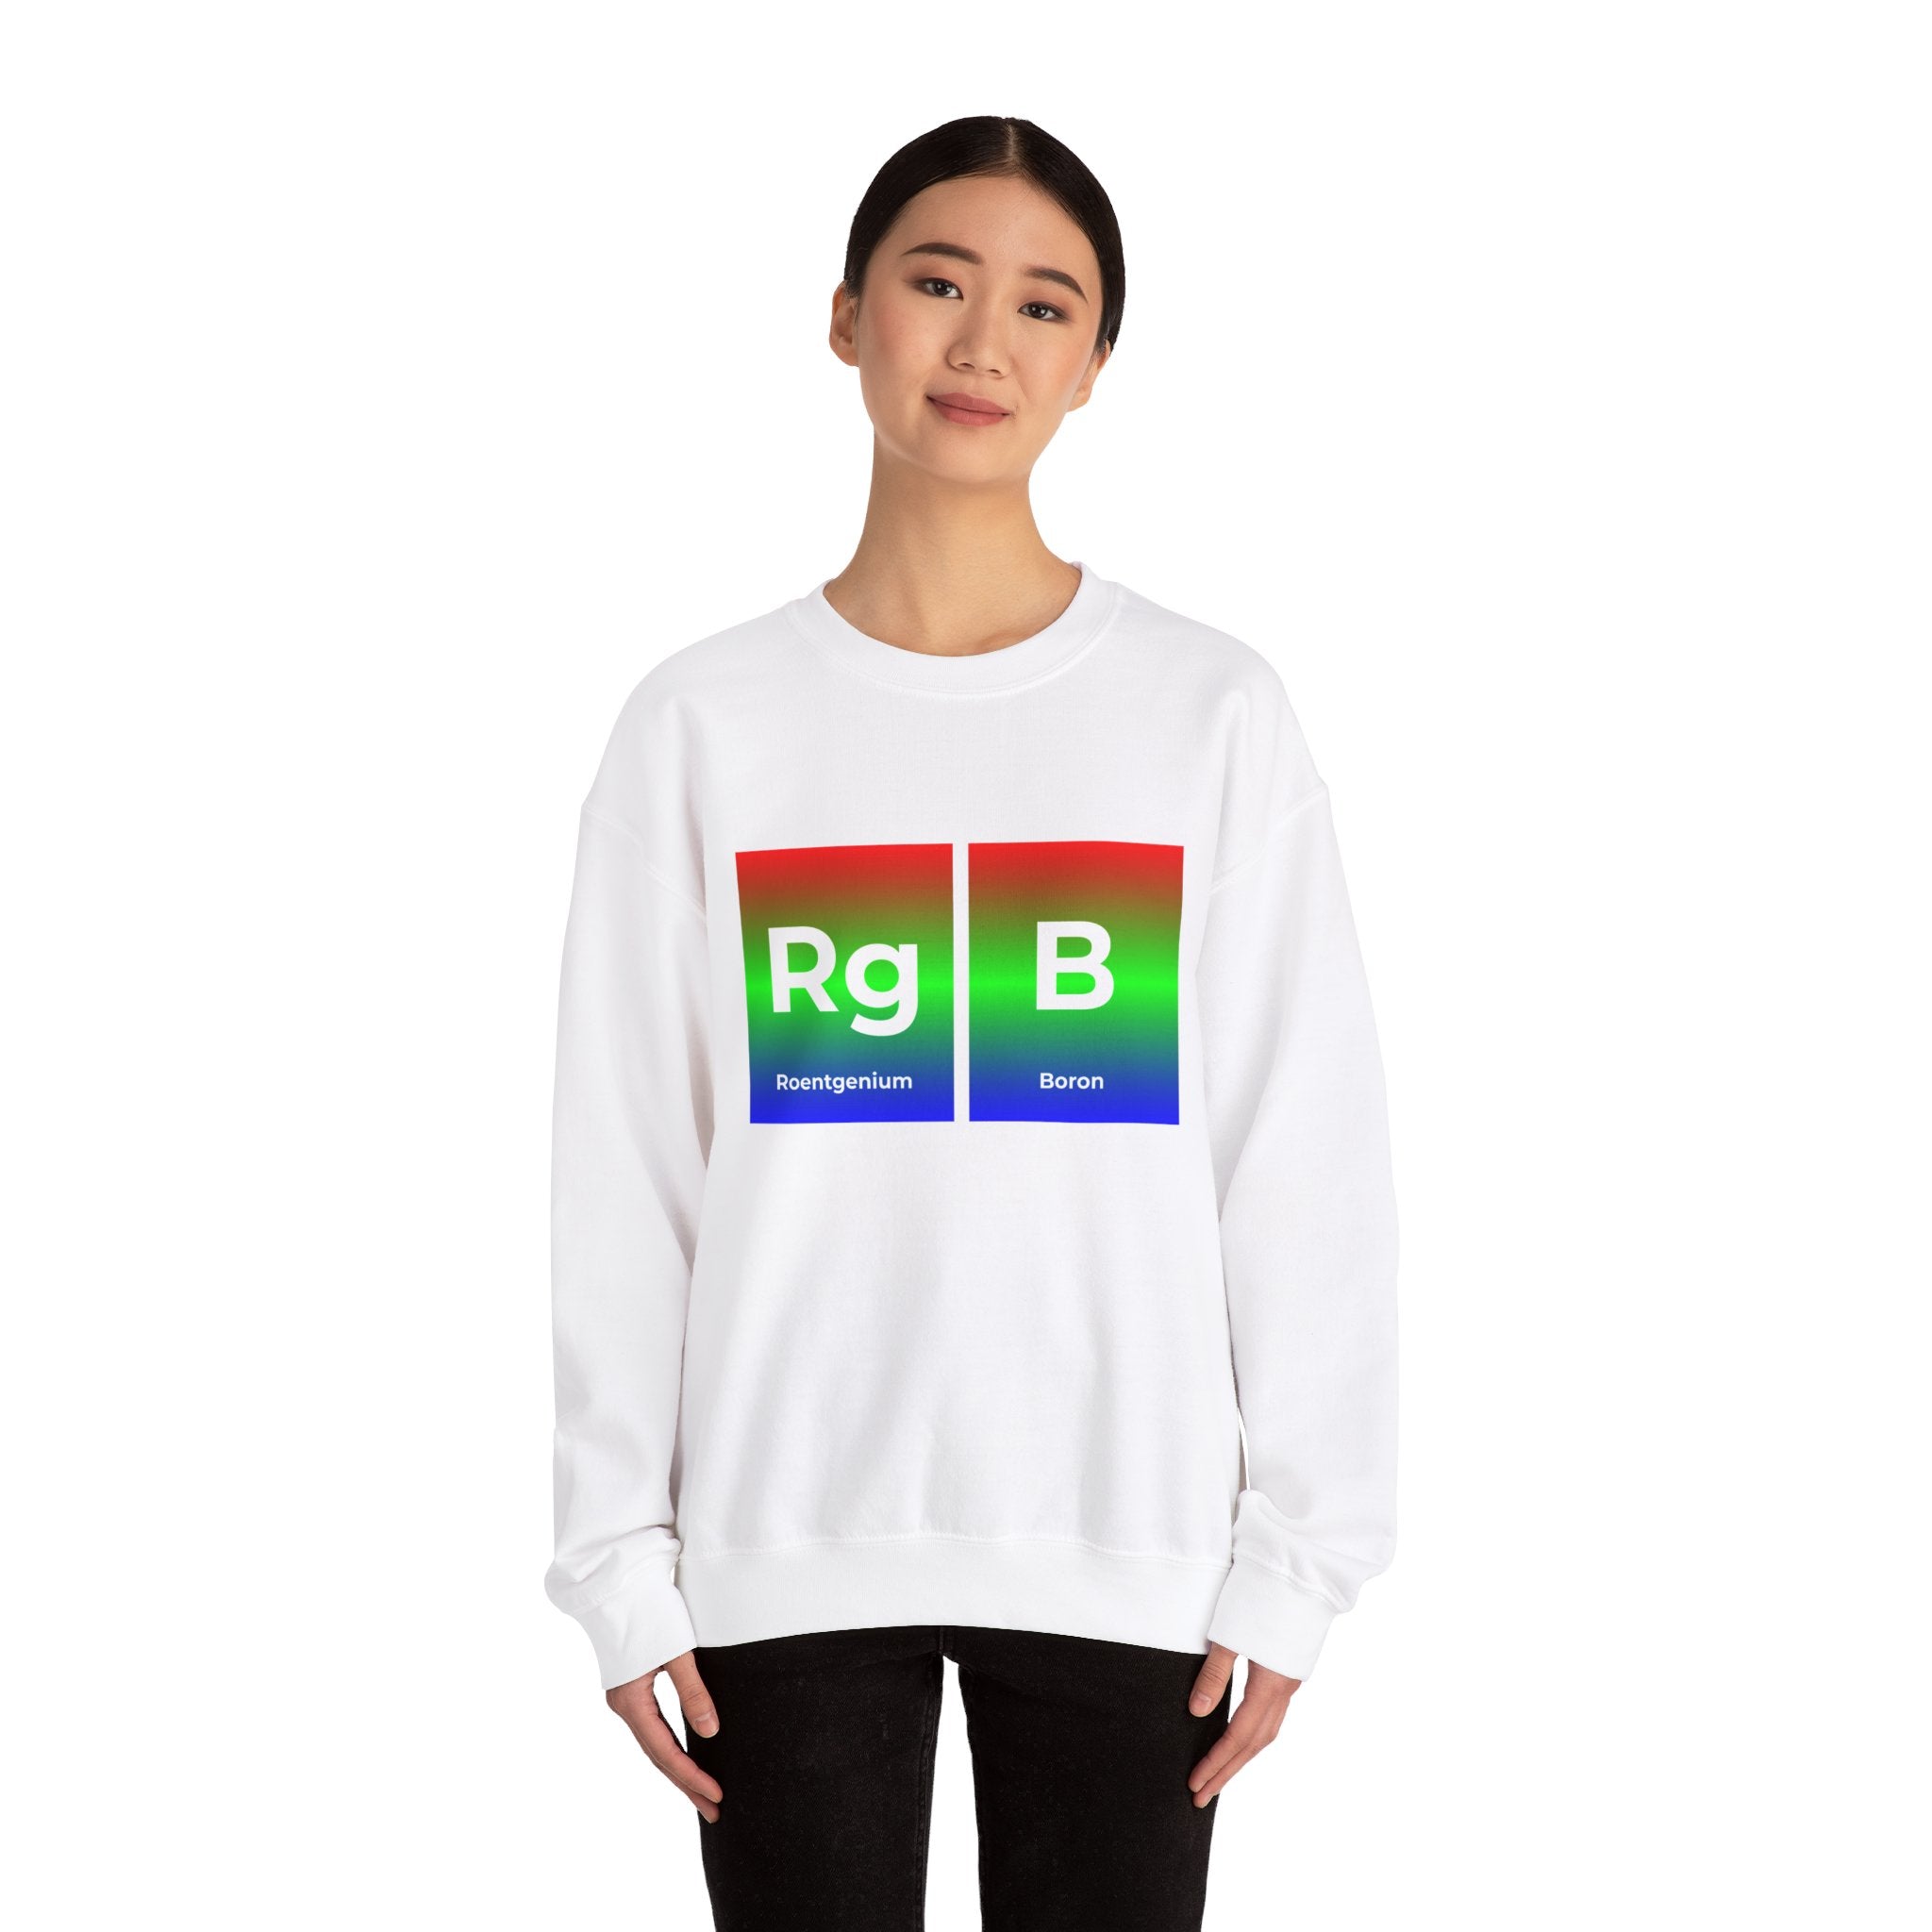 Person wearing a cozy white sweatshirt, perfect for comfort lovers, featuring colorful periodic table elements labeled "Roentgenium" and "Boron" displayed as "Rg" and "B". This RG-B - Sweatshirt combines style and science seamlessly.